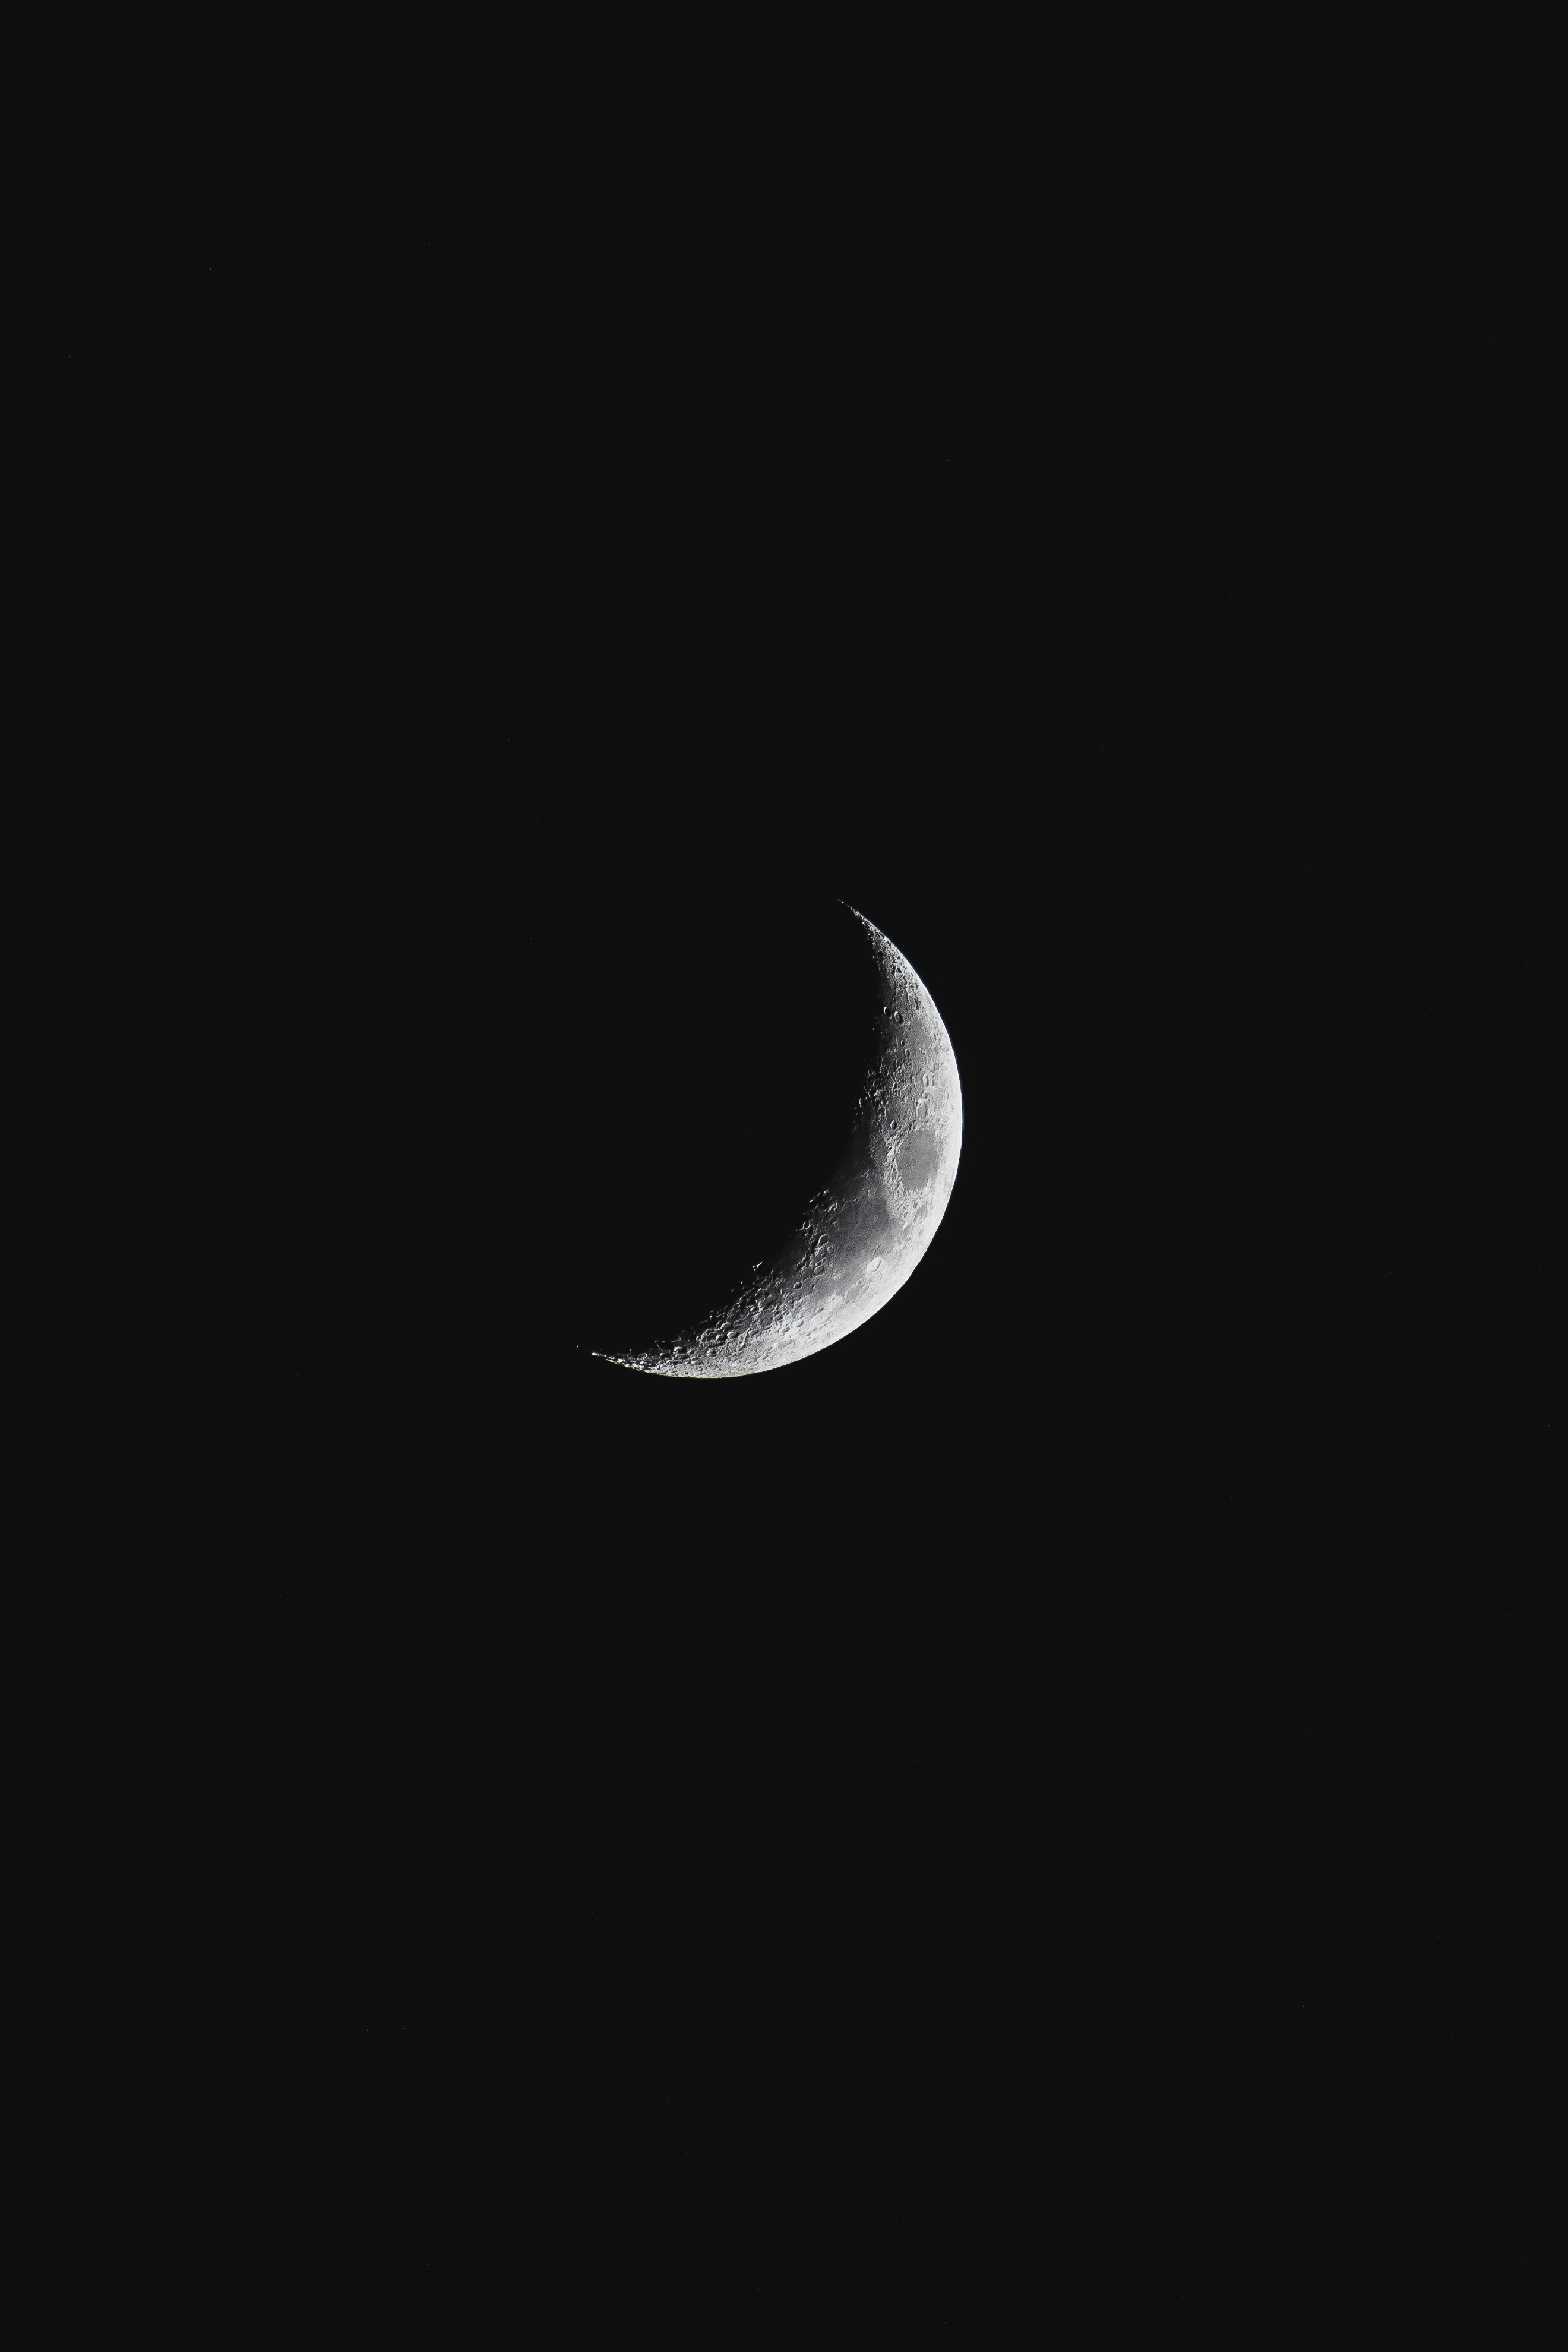 Half moon - Check out my Instagram - @WithLuke⠀ If you use my images and want to support me as a photographer any donations however small would be appreciated! Paypal - https://bit.ly/3dX4x1Y